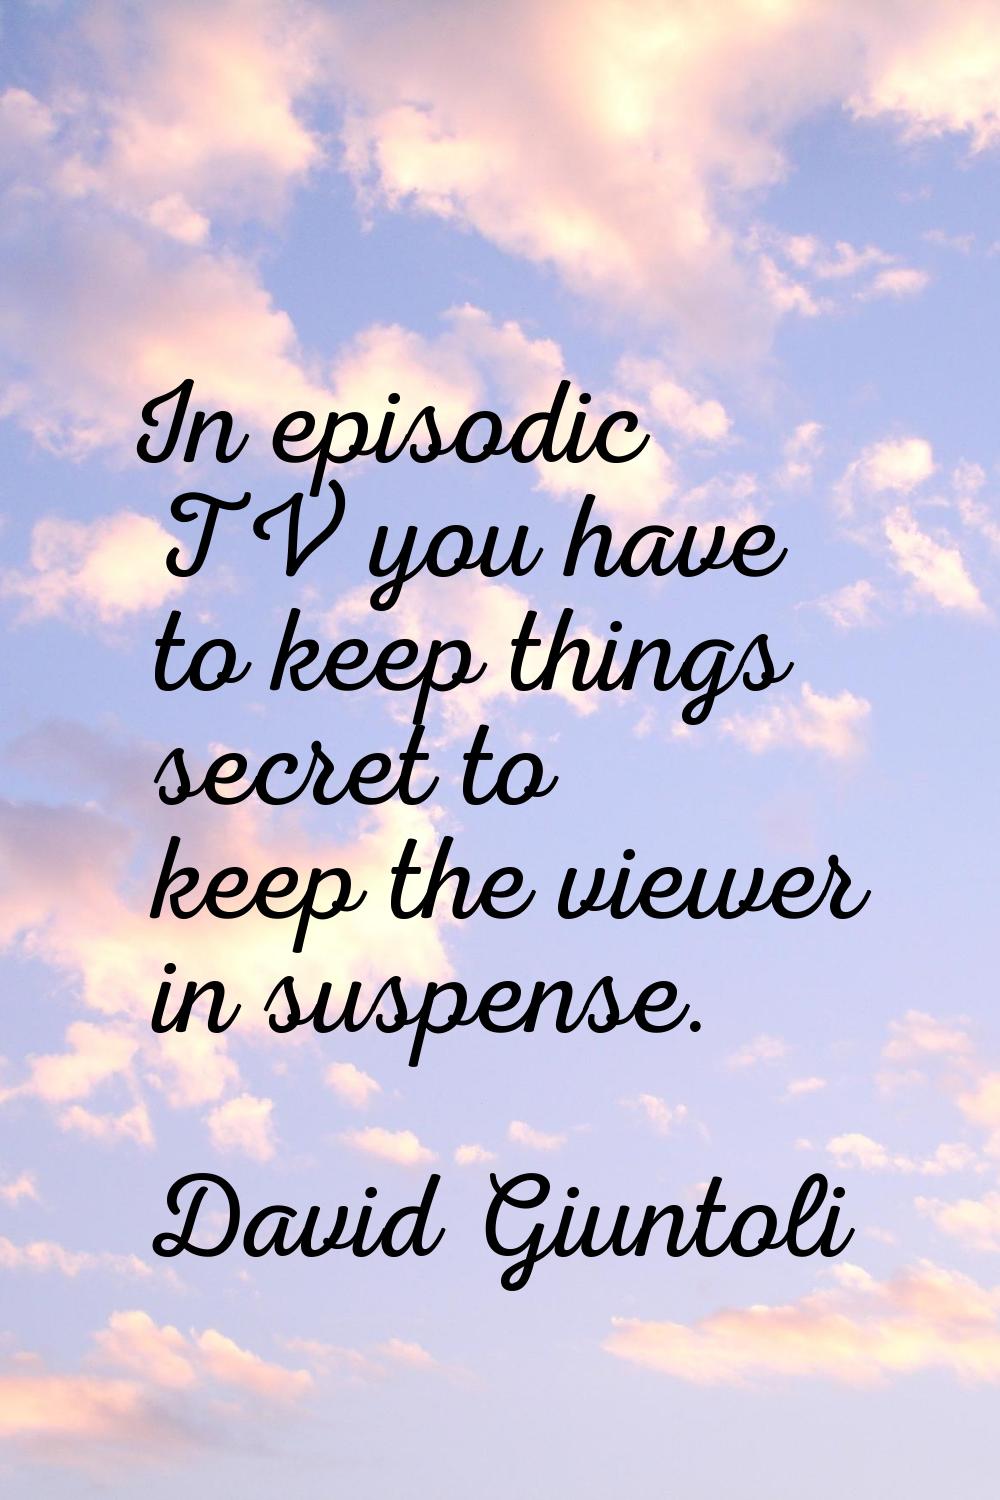 In episodic TV you have to keep things secret to keep the viewer in suspense.